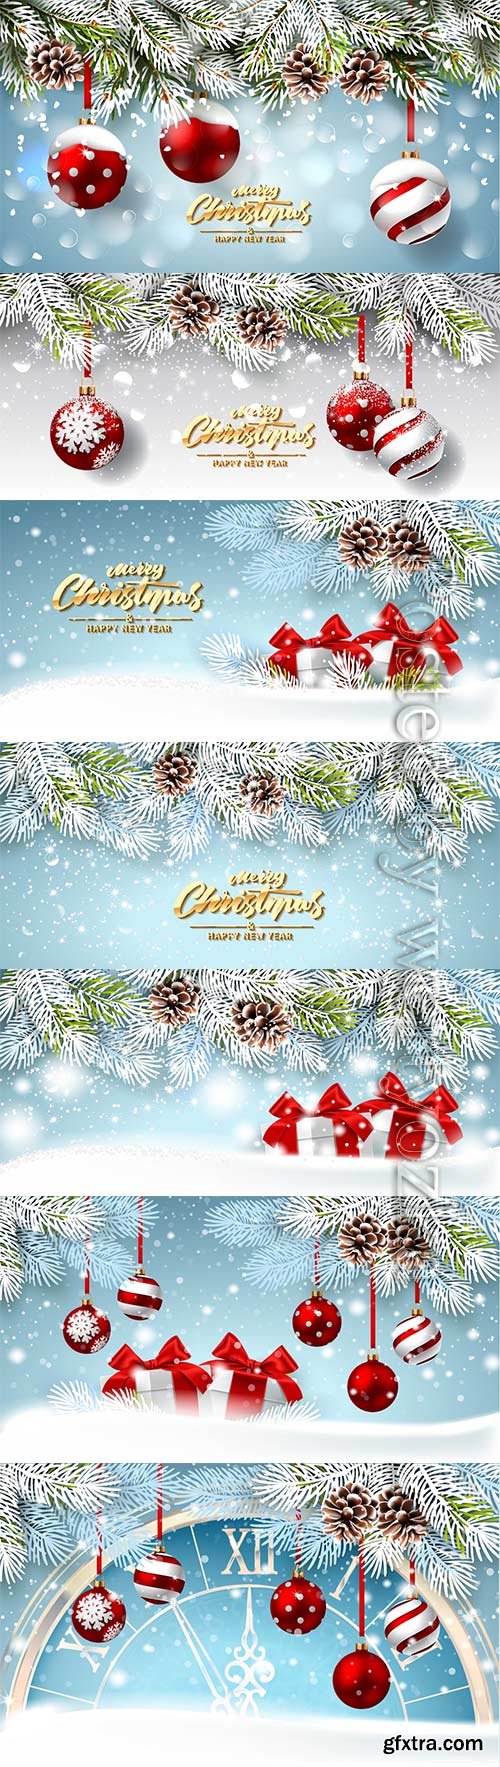 Christmas card with gifts on a winter background of snow-